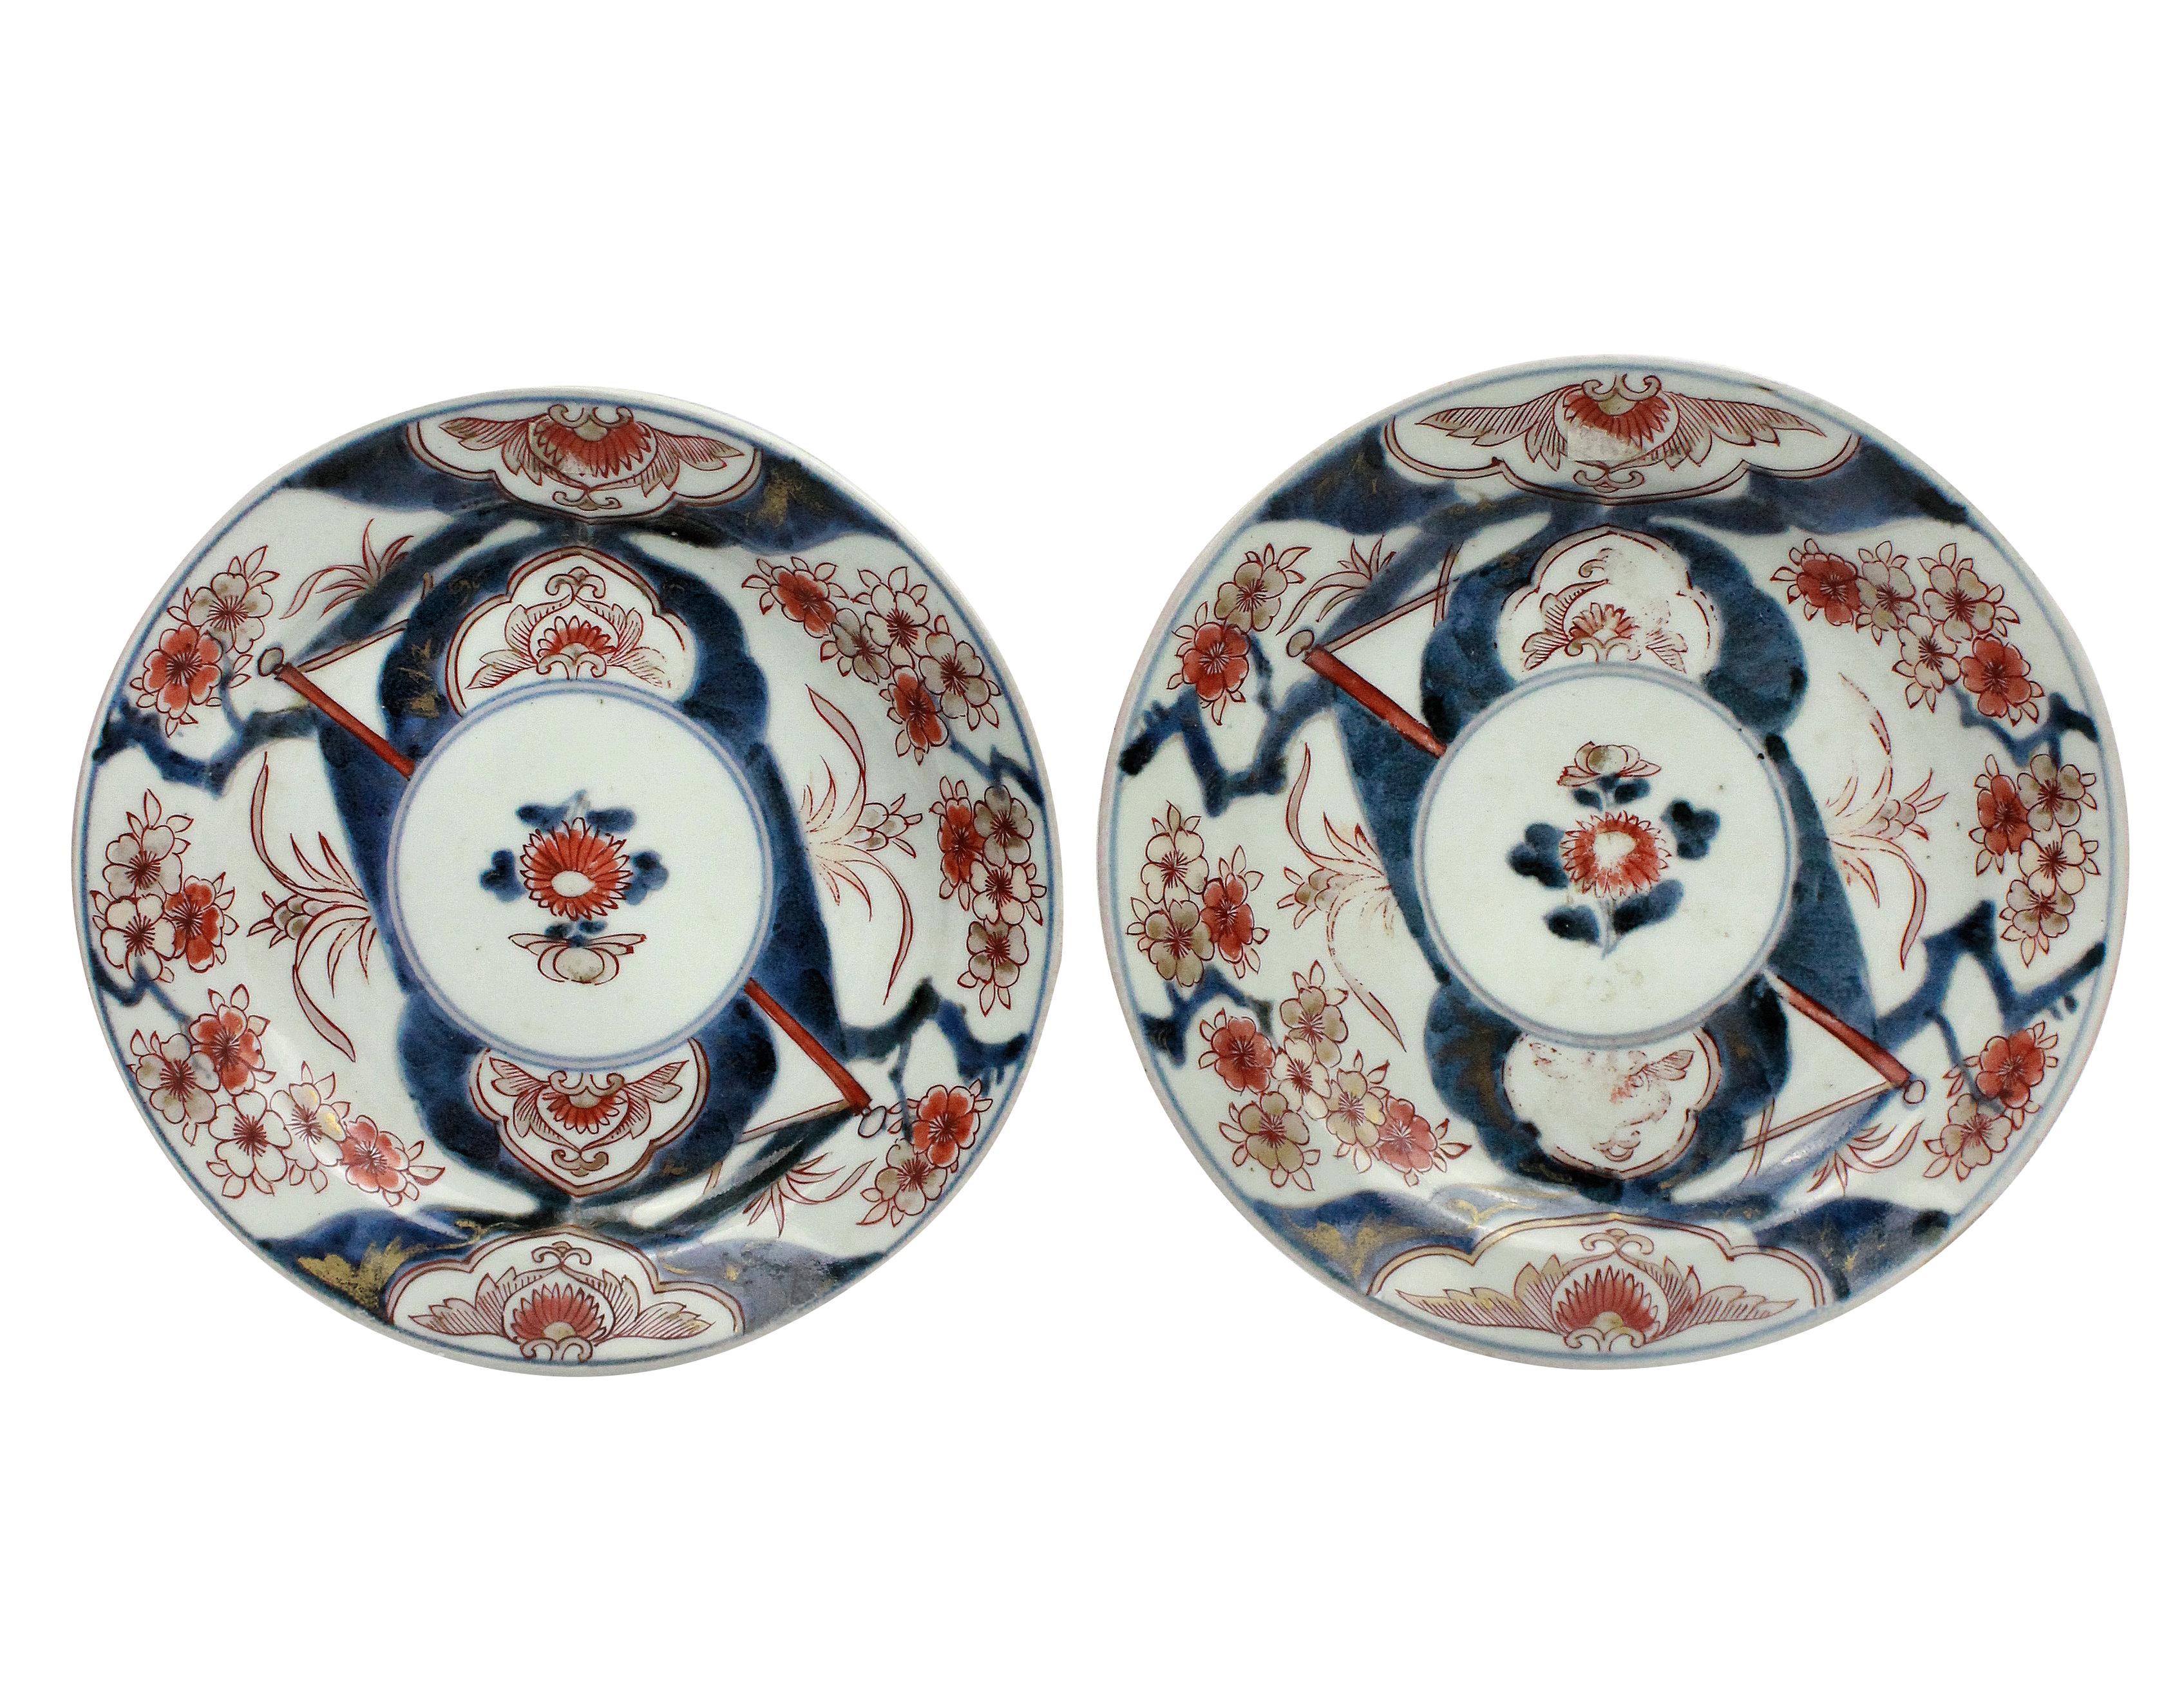 Pair of traditional Japanese Imari Edo period plates. No repairs or chips, just rubbing to the gilding and glaze.